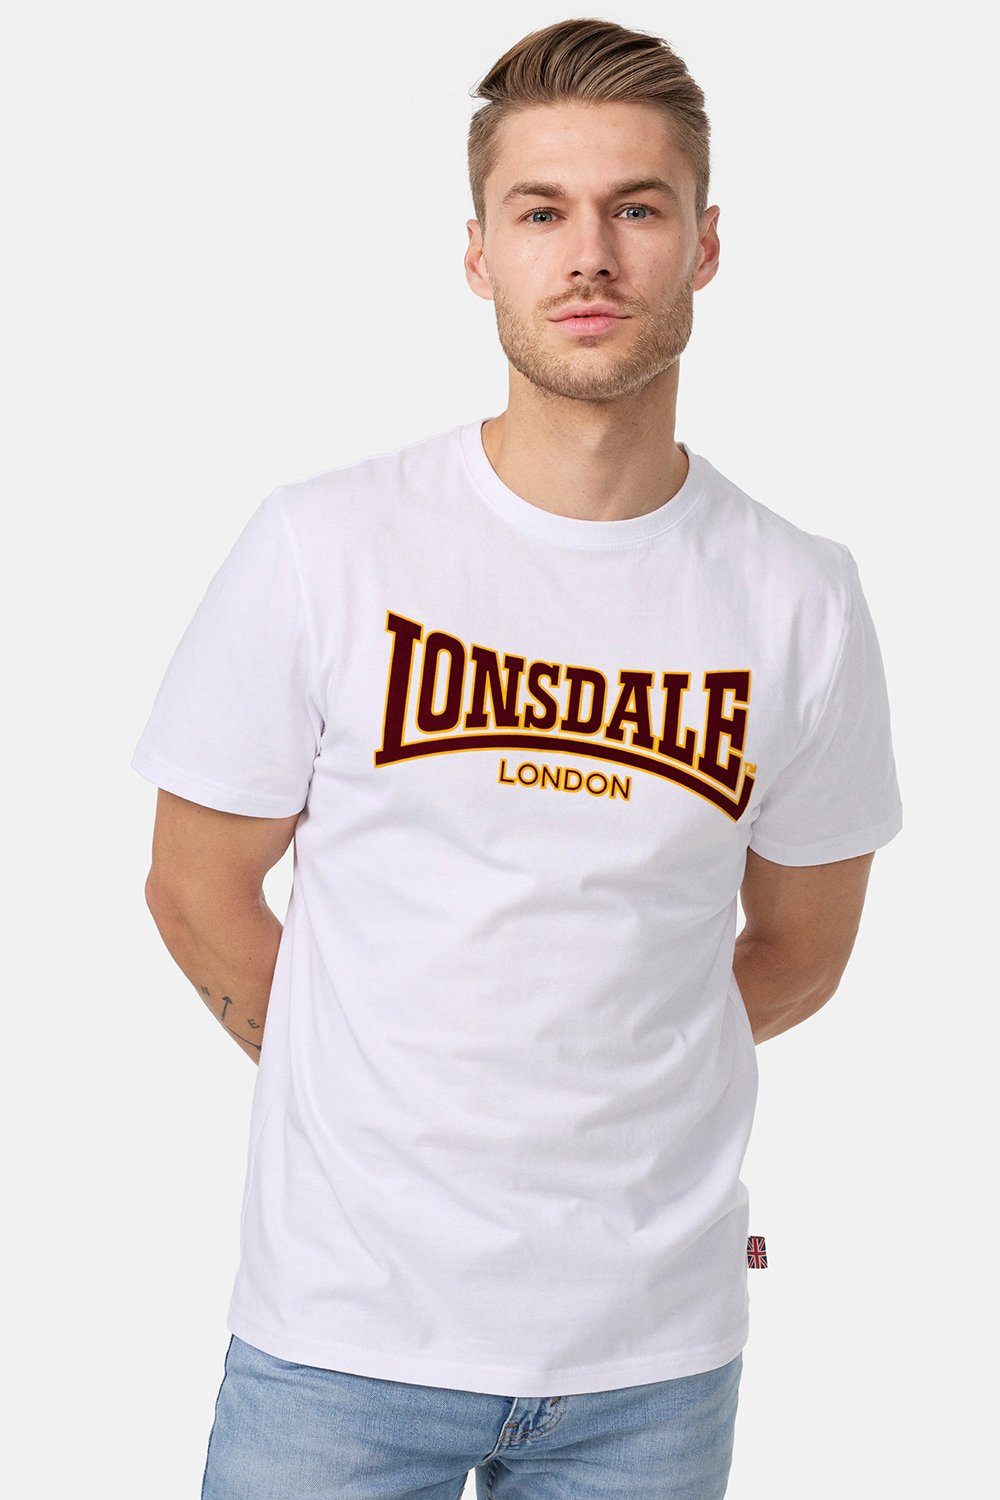 Lonsdale T-Shirt CLASSIC White | T-Shirts